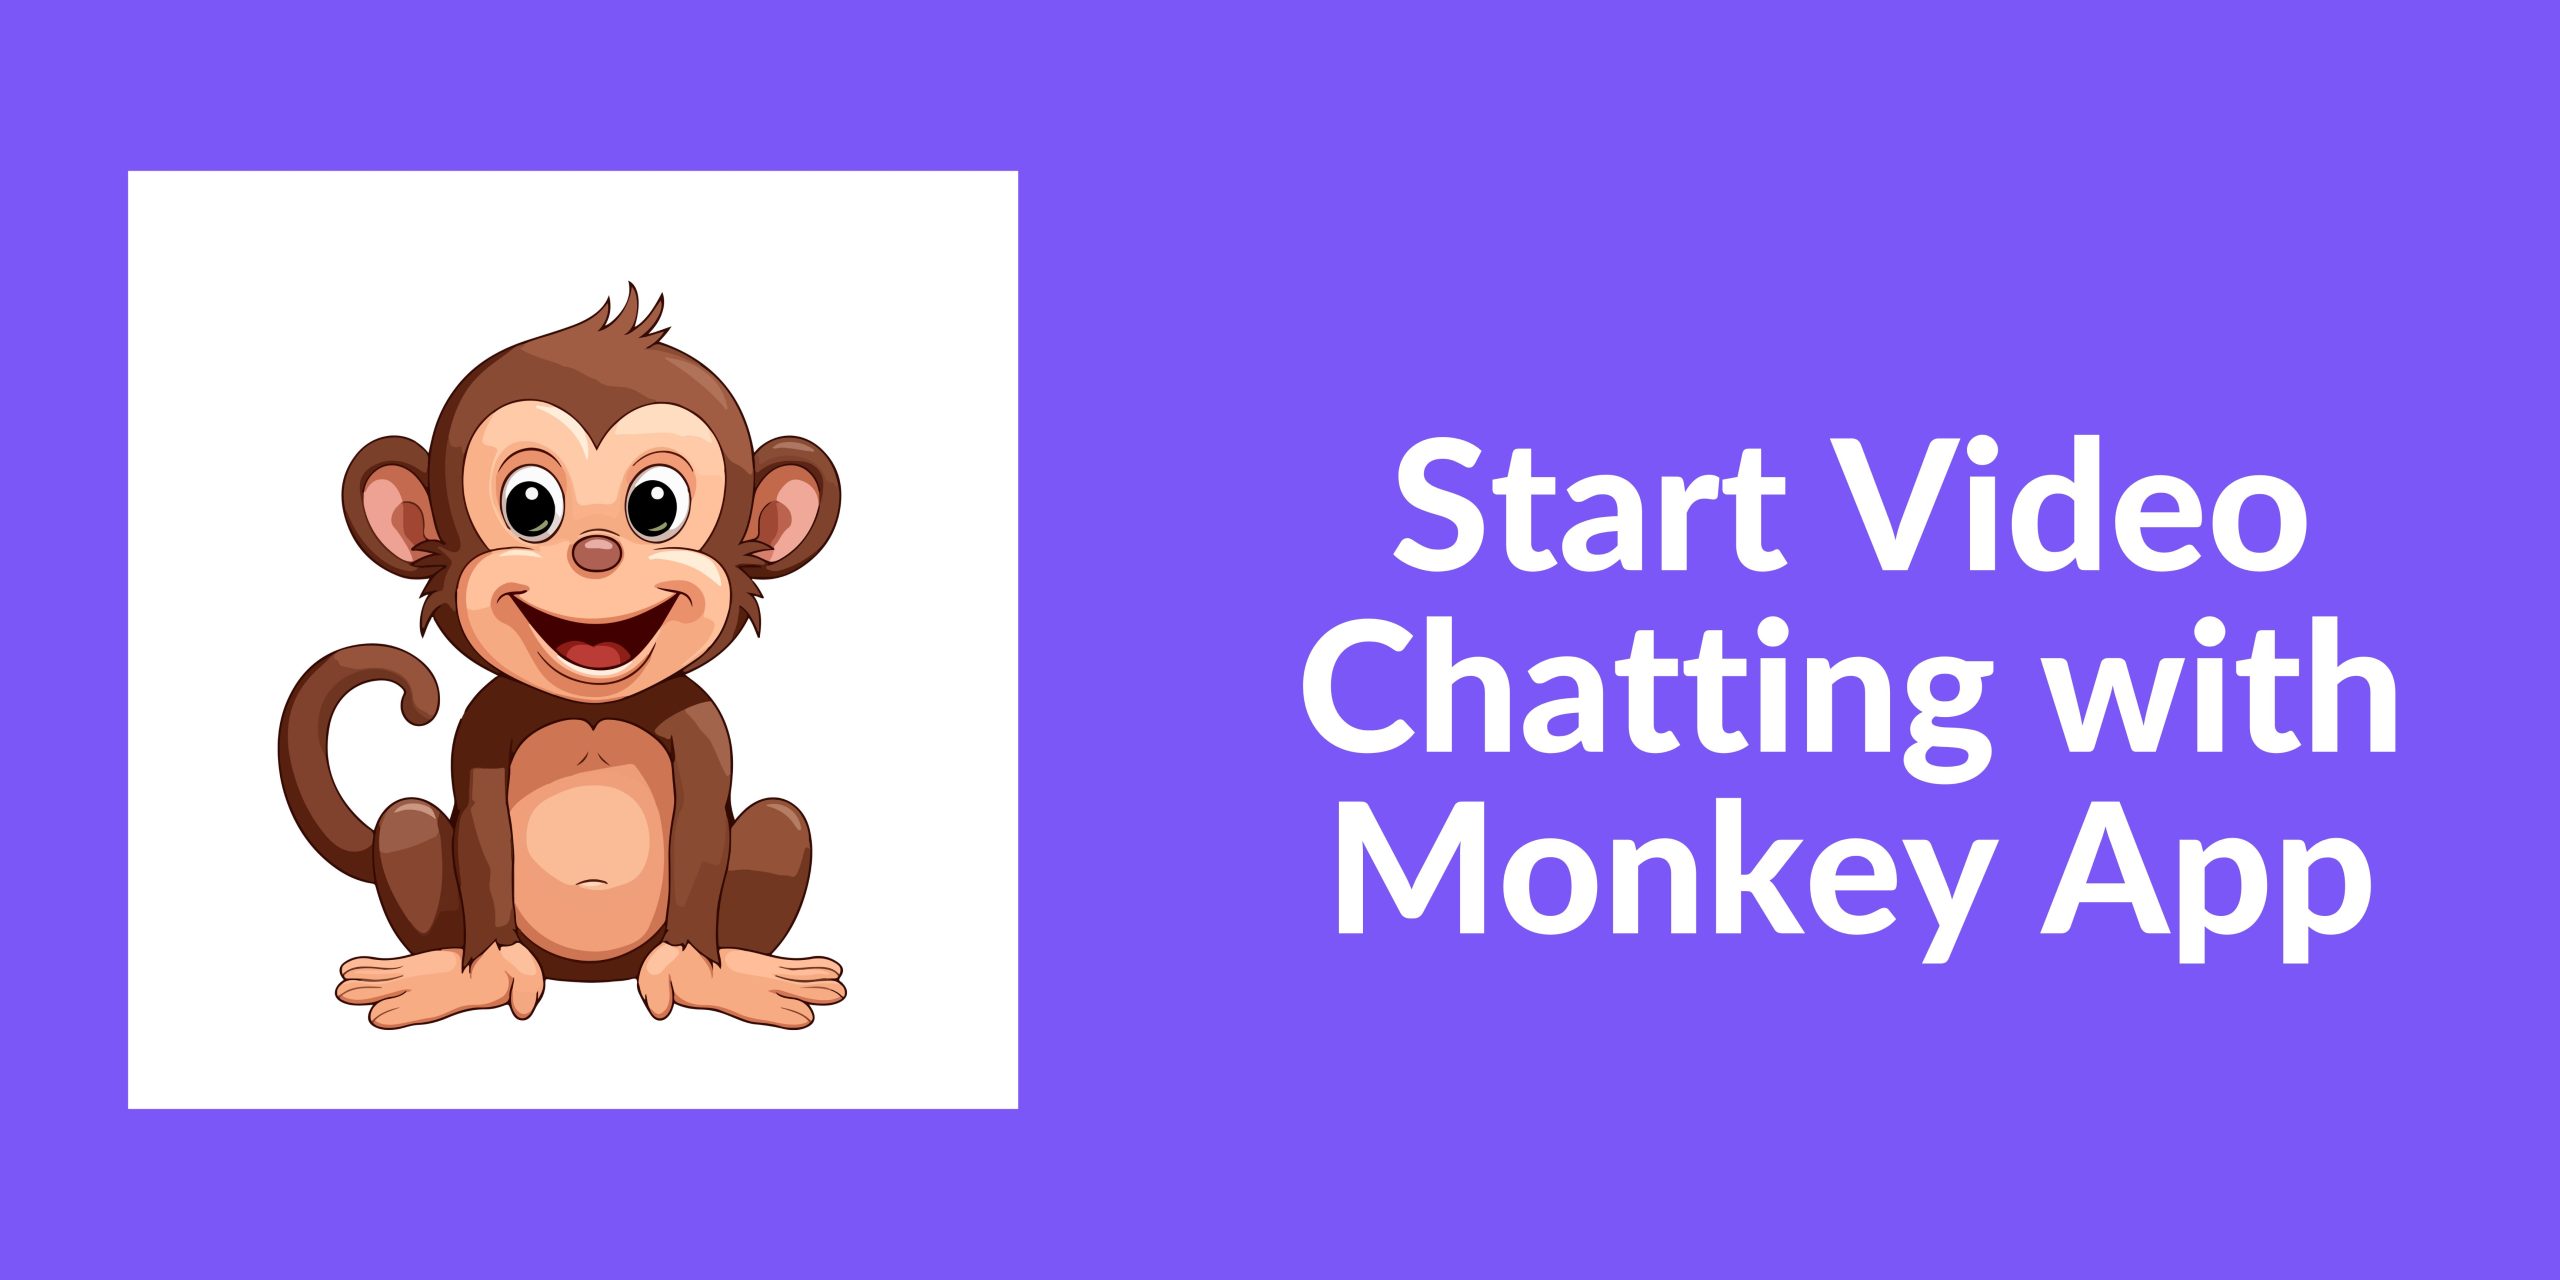 Start Video Chatting with Monkey App